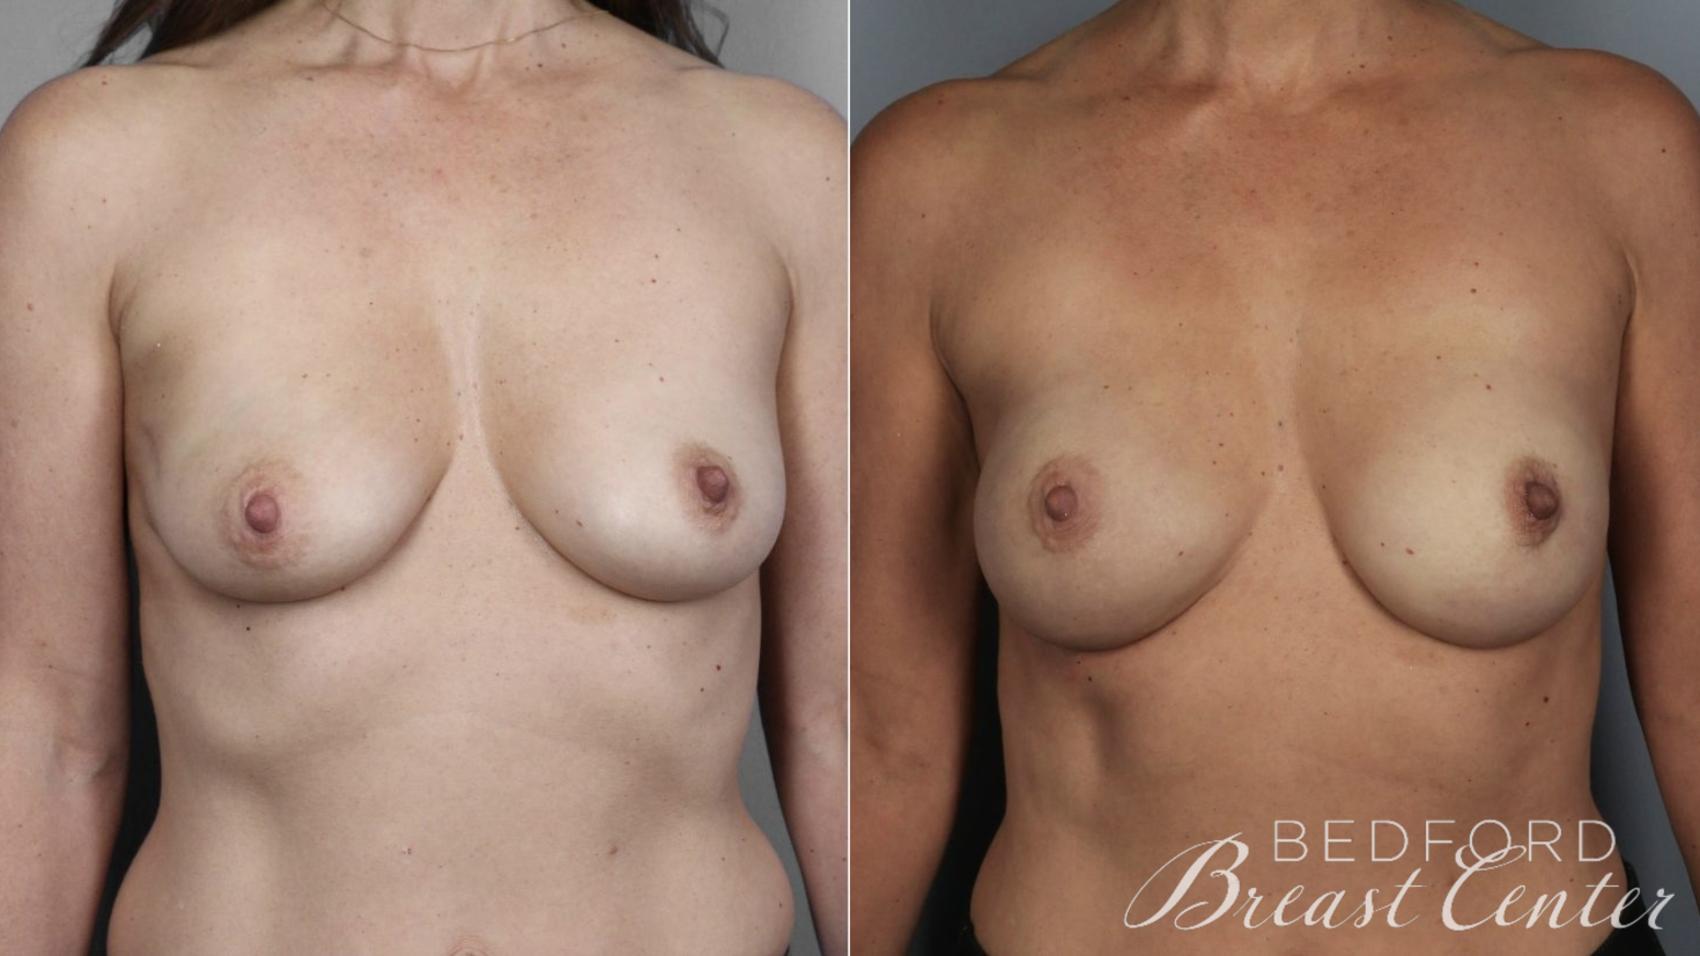 Before & After Nipple Sparing Mastectomy with One-Stage Breast Reconstruction Case 2 Front View in Beverly Hills, Los Angeles, Santa Monica, Glendale, and Malibu, CA